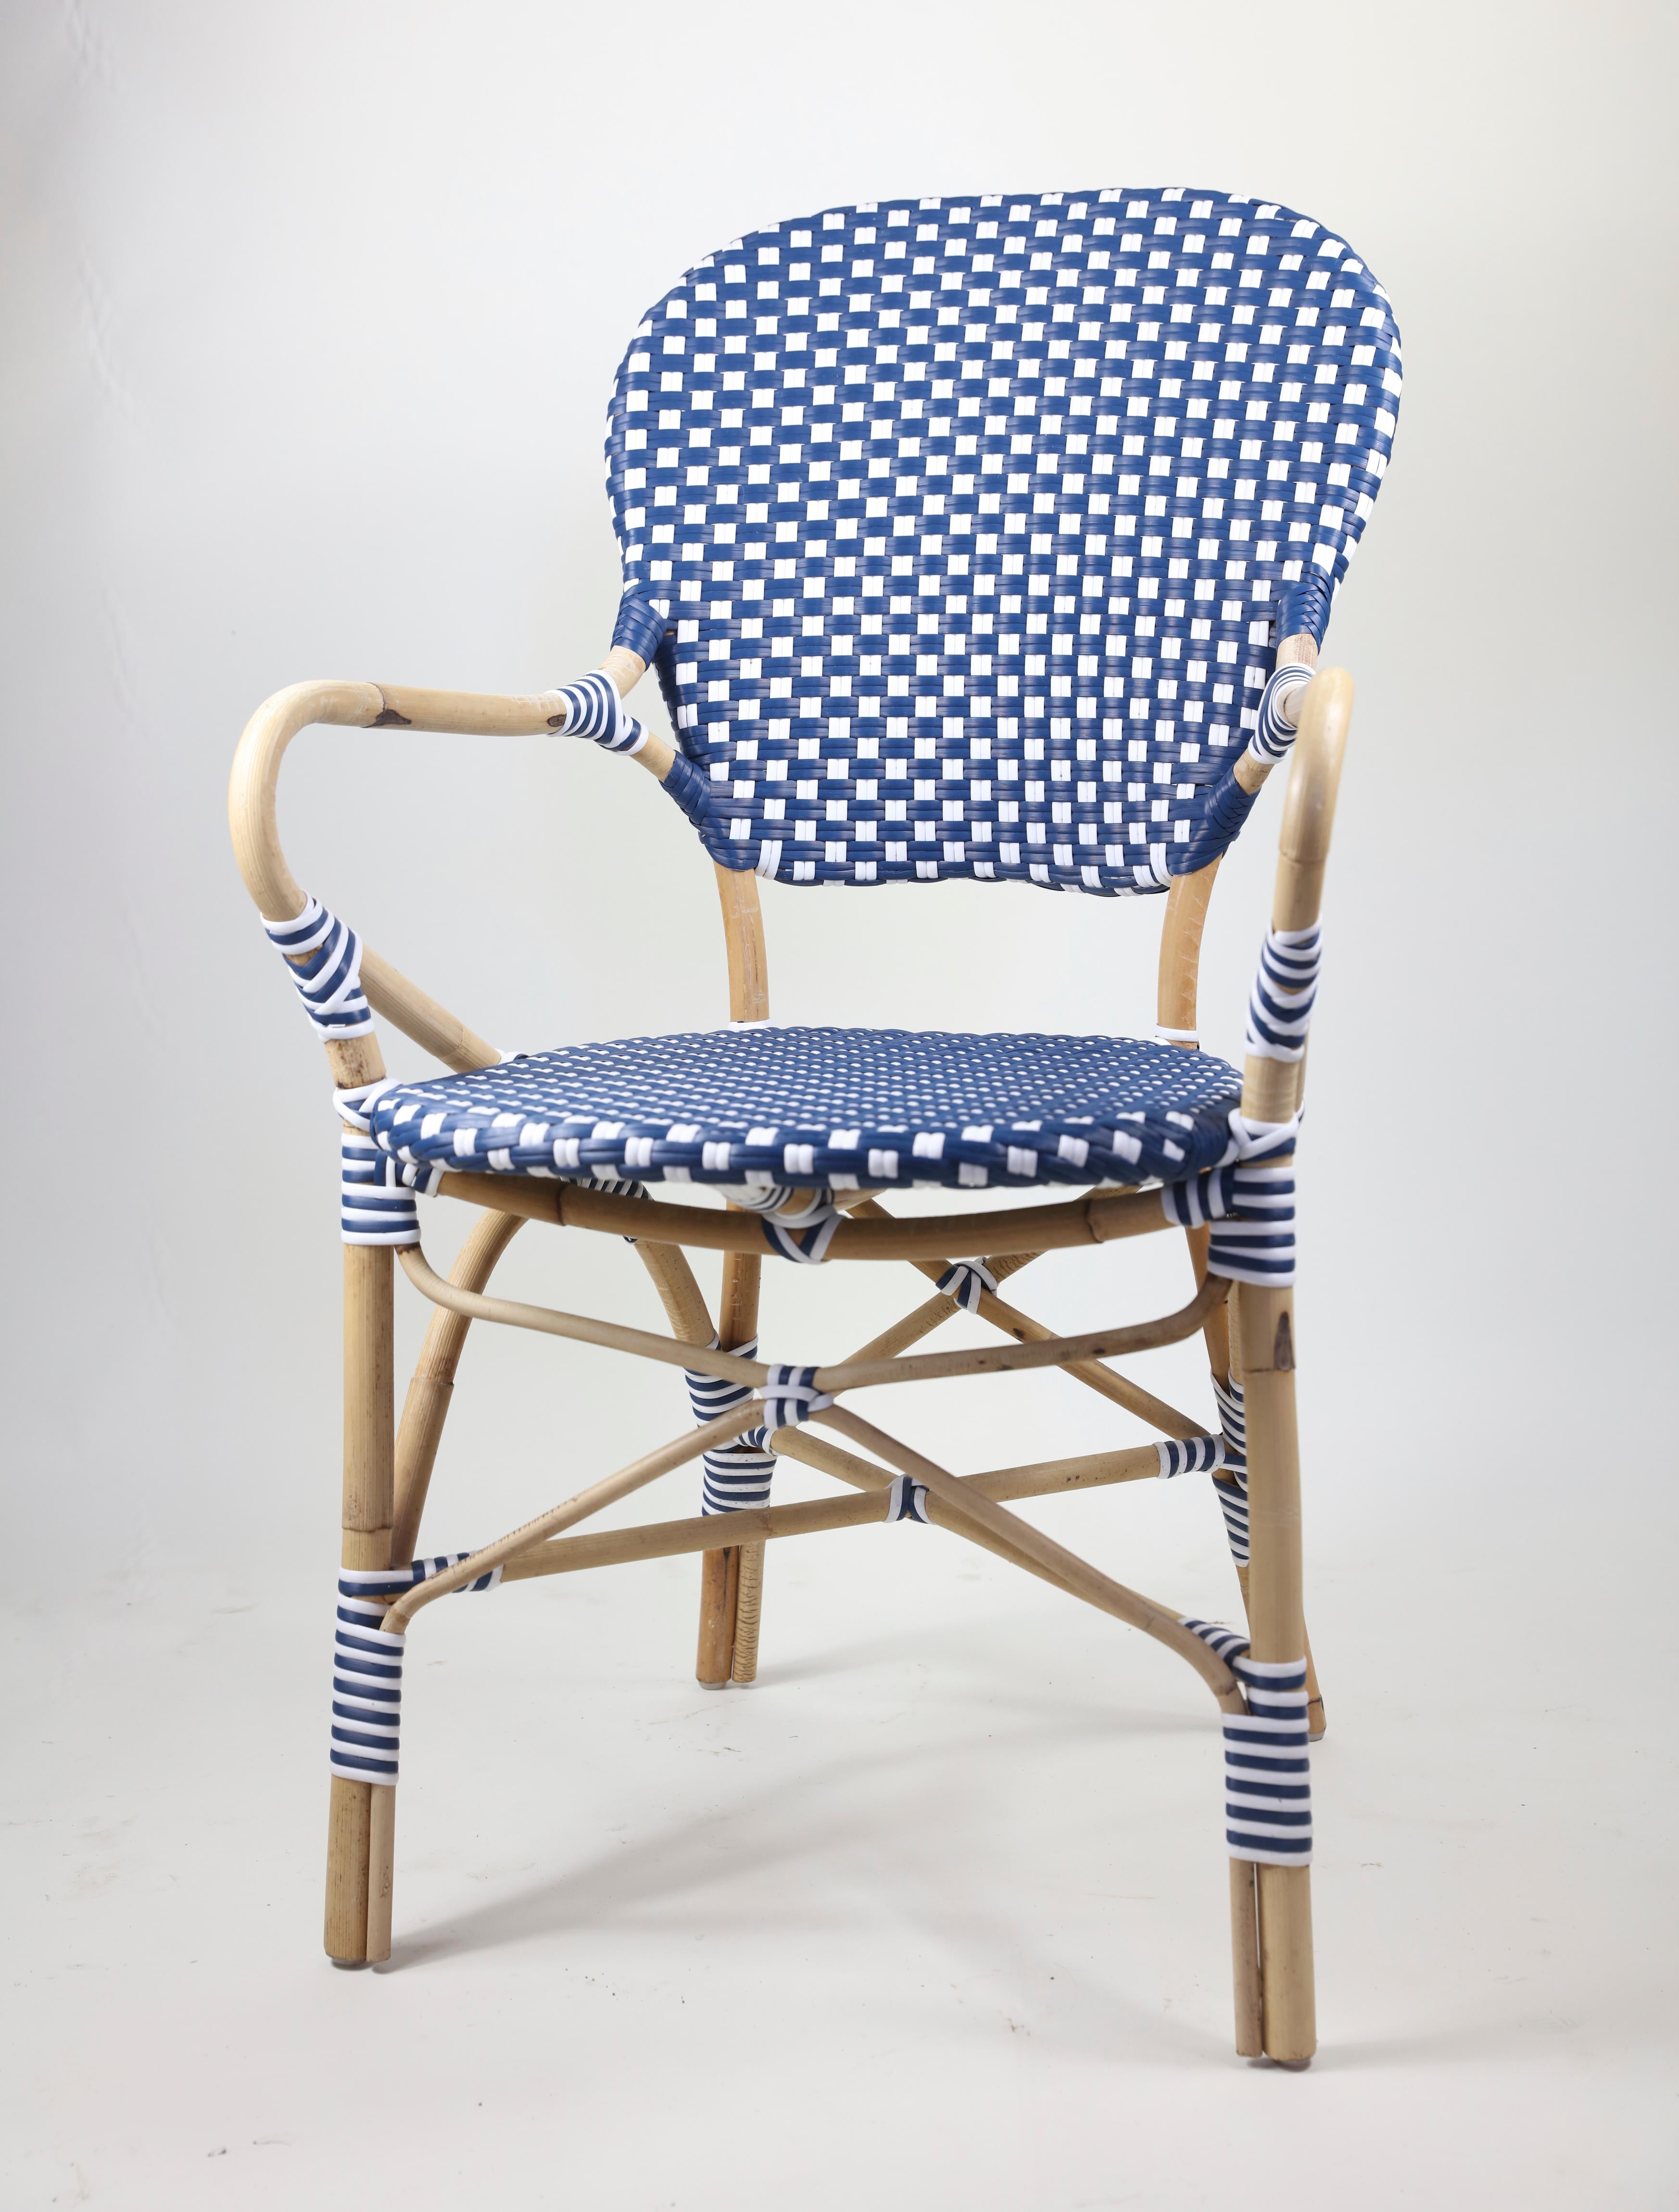 Women's or Men's Pair of Blue and White Serena & Lily Woven Chairs